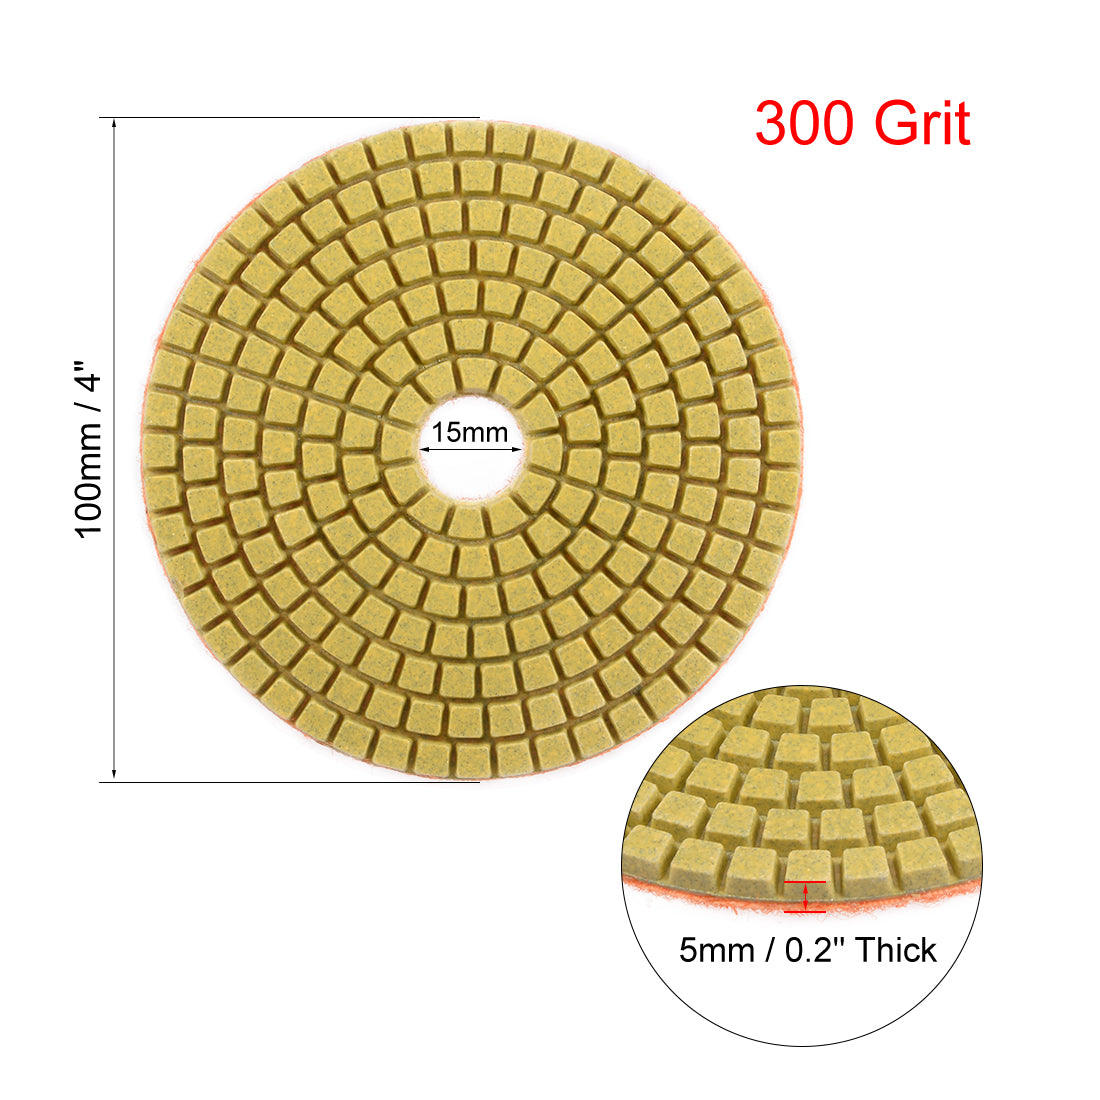 uxcell Uxcell Diamond Polishing Sanding Grinding Pads Discs 4 Inch Grit 300 1 Pcs for Granite Concrete Stone Marble